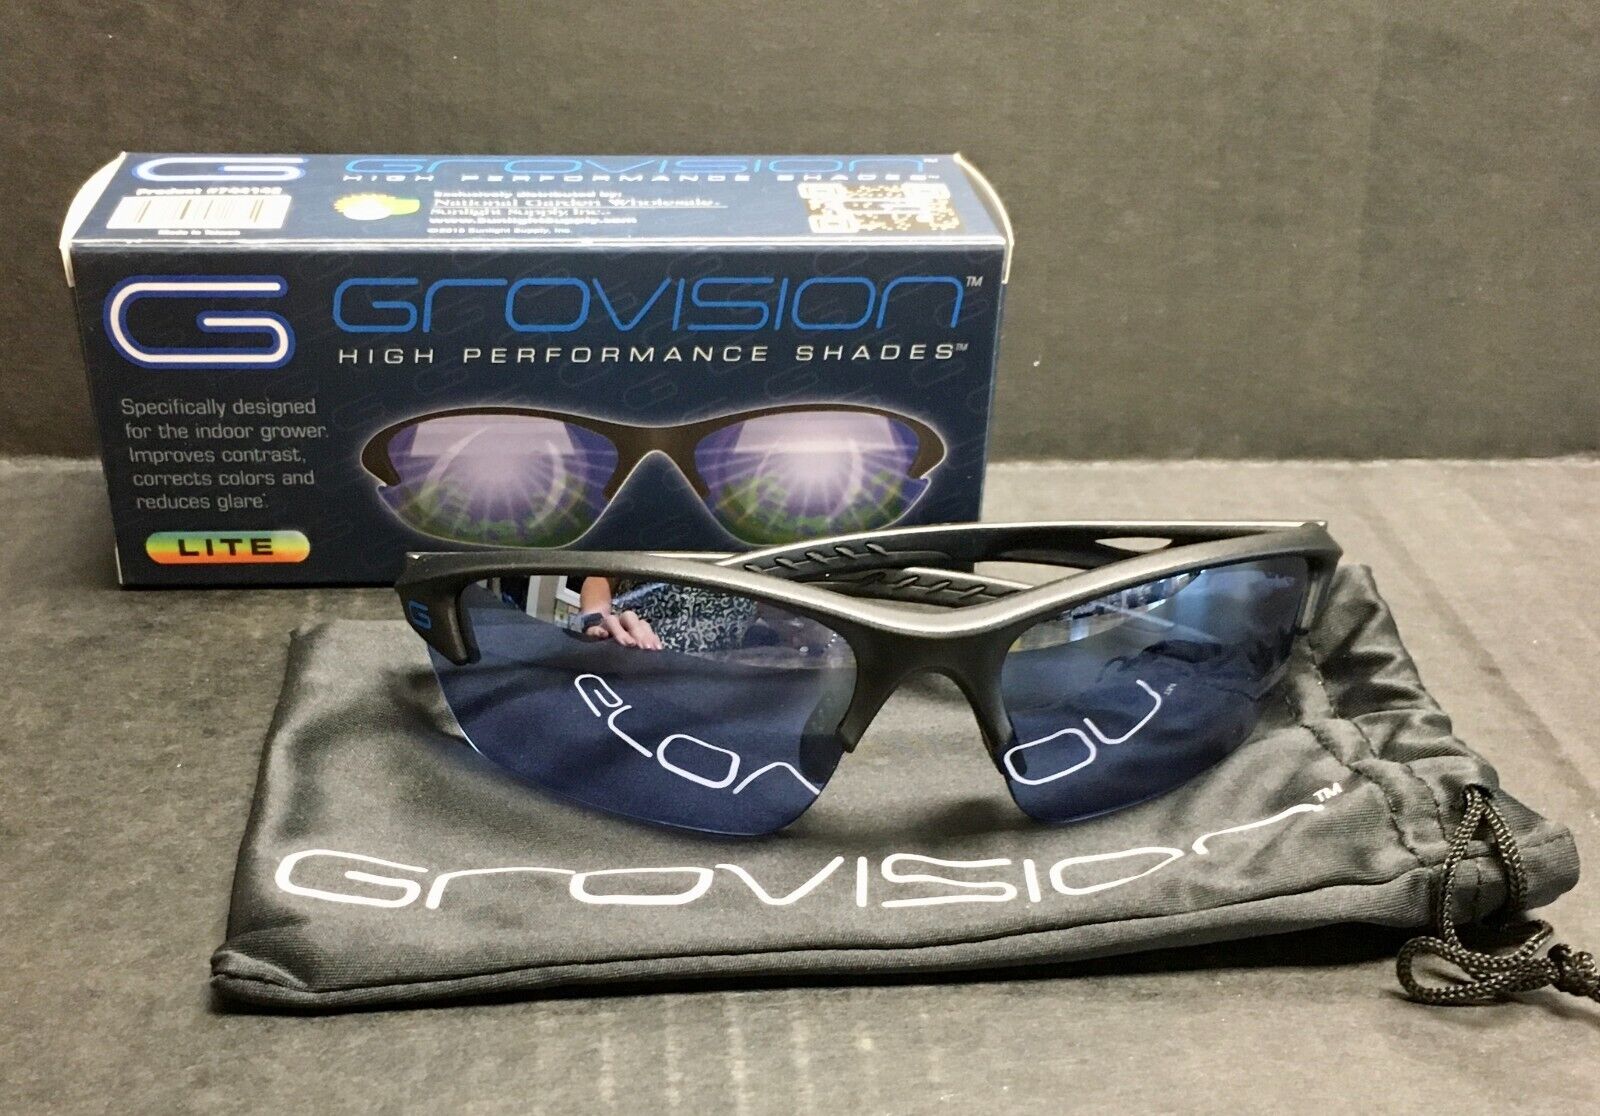 GroVision High performance LED/HID sunglasses. New and Unopened